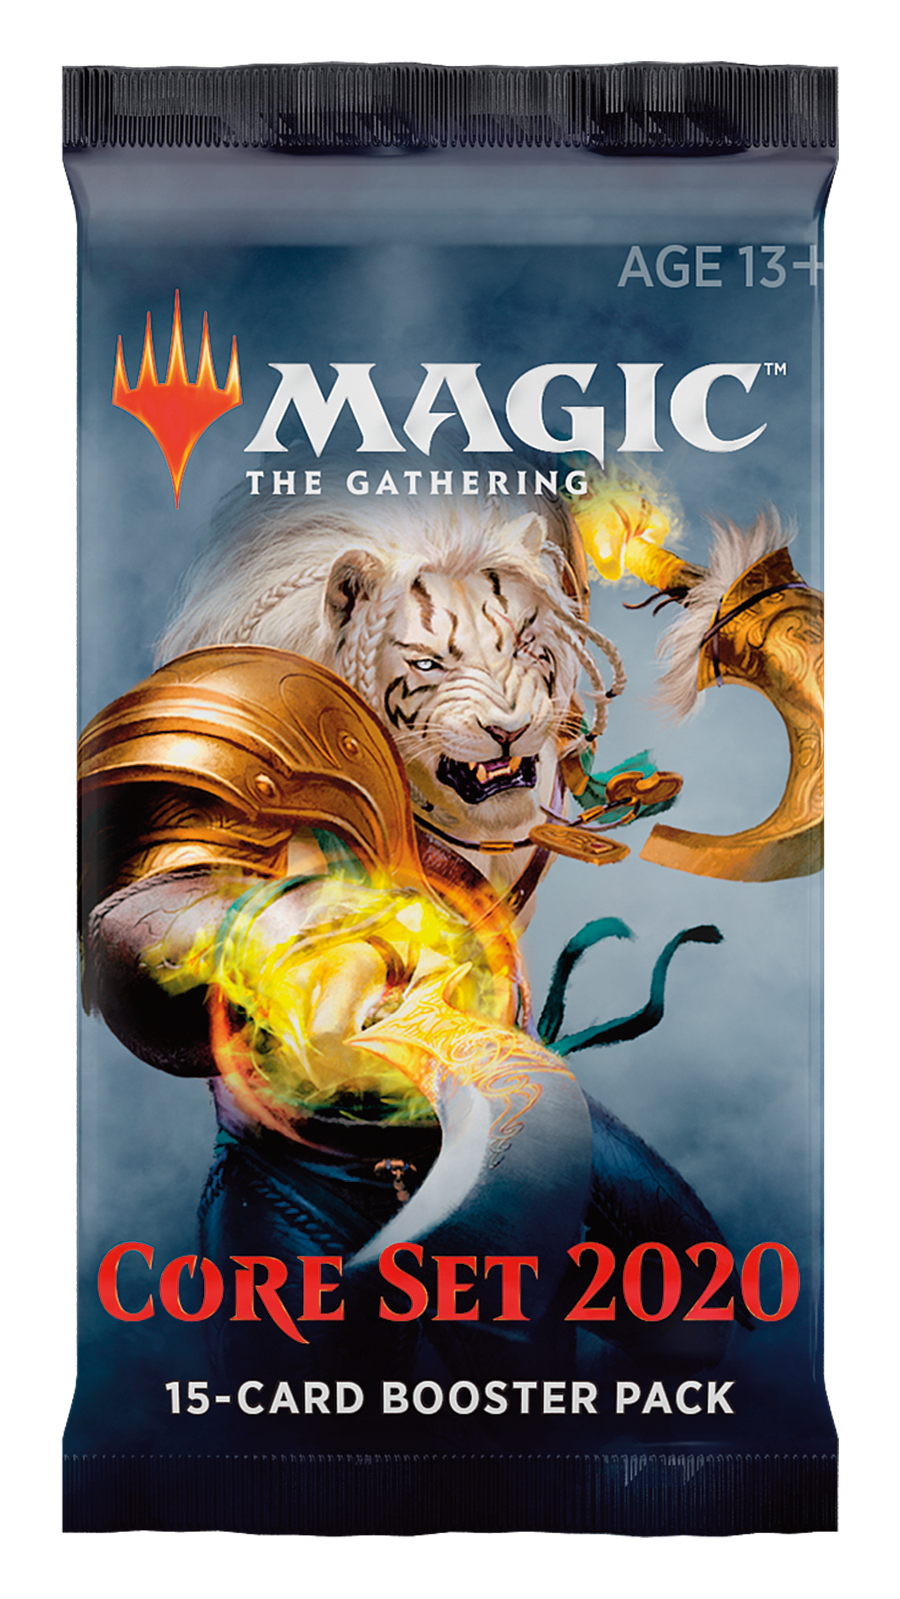 Magic: The Gathering - Core Set 2020 Booster Pack